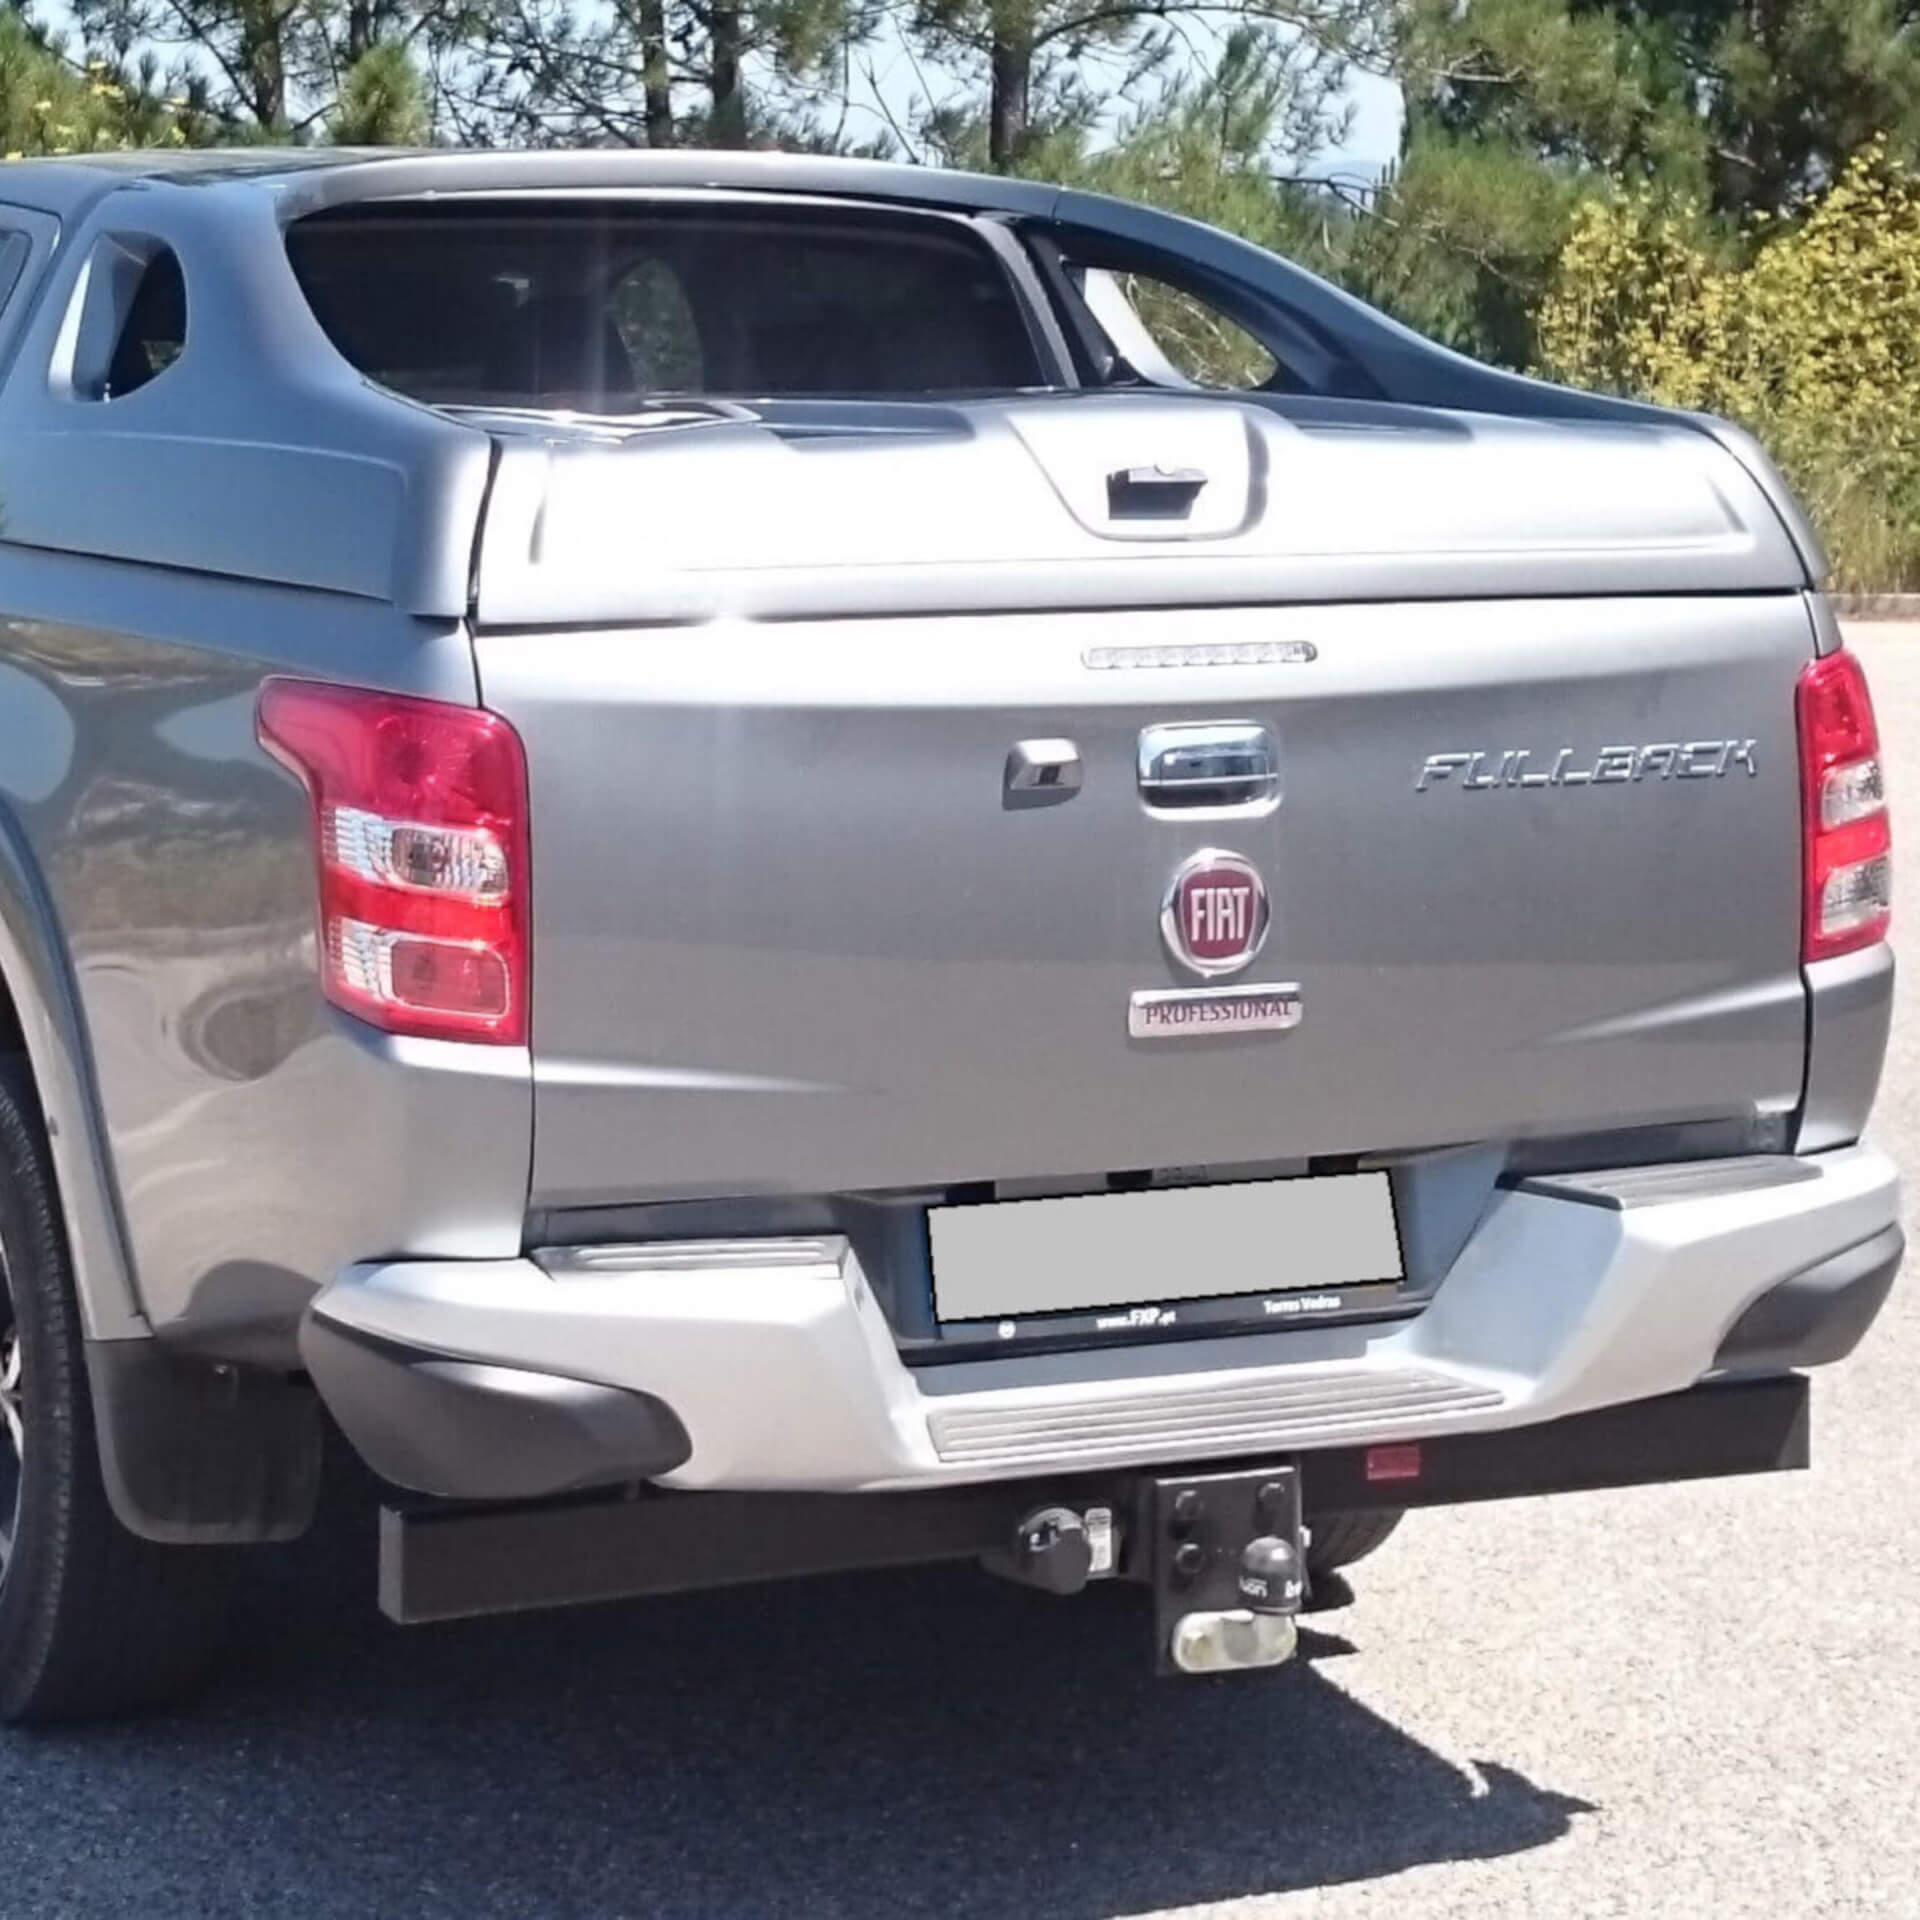 Direct4x4 accessories for Fiat Fullback vehicles with a photo of the back of a silver Fiat Fullback